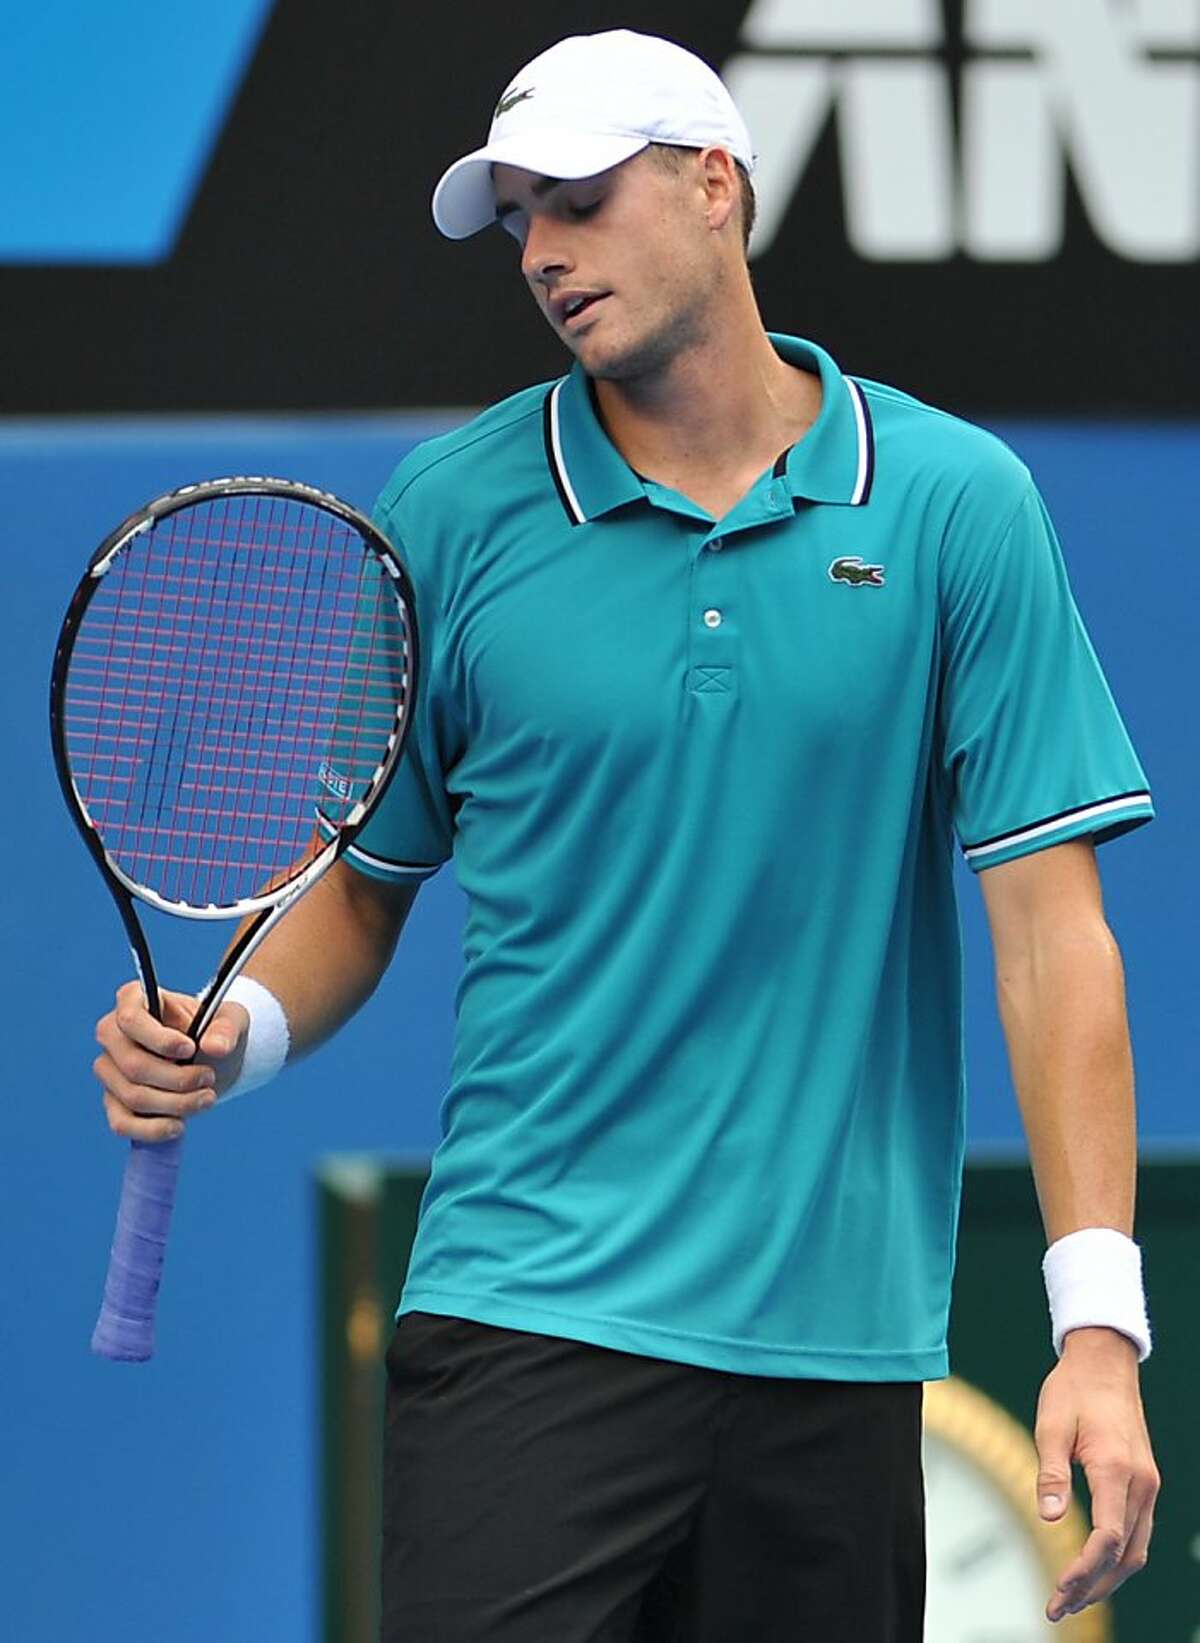 John Isner of the US gestures during his men's singles match against Feliciano Lopez of Spain on the fifth day of the Australian Open tennis tournament in Melbourne on January 20, 2012. Lopez won 6-3. 6-7. 6-4. 6-7. 6-1. . AFP PHOTO/NICOLAS ASFOURI IMAGE STRICTLY RESTRICTED TO EDITORIAL USE STRICTLY NO COMMERCIAL USE (Photo credit should read NICOLAS ASFOURI/AFP/Getty Images)